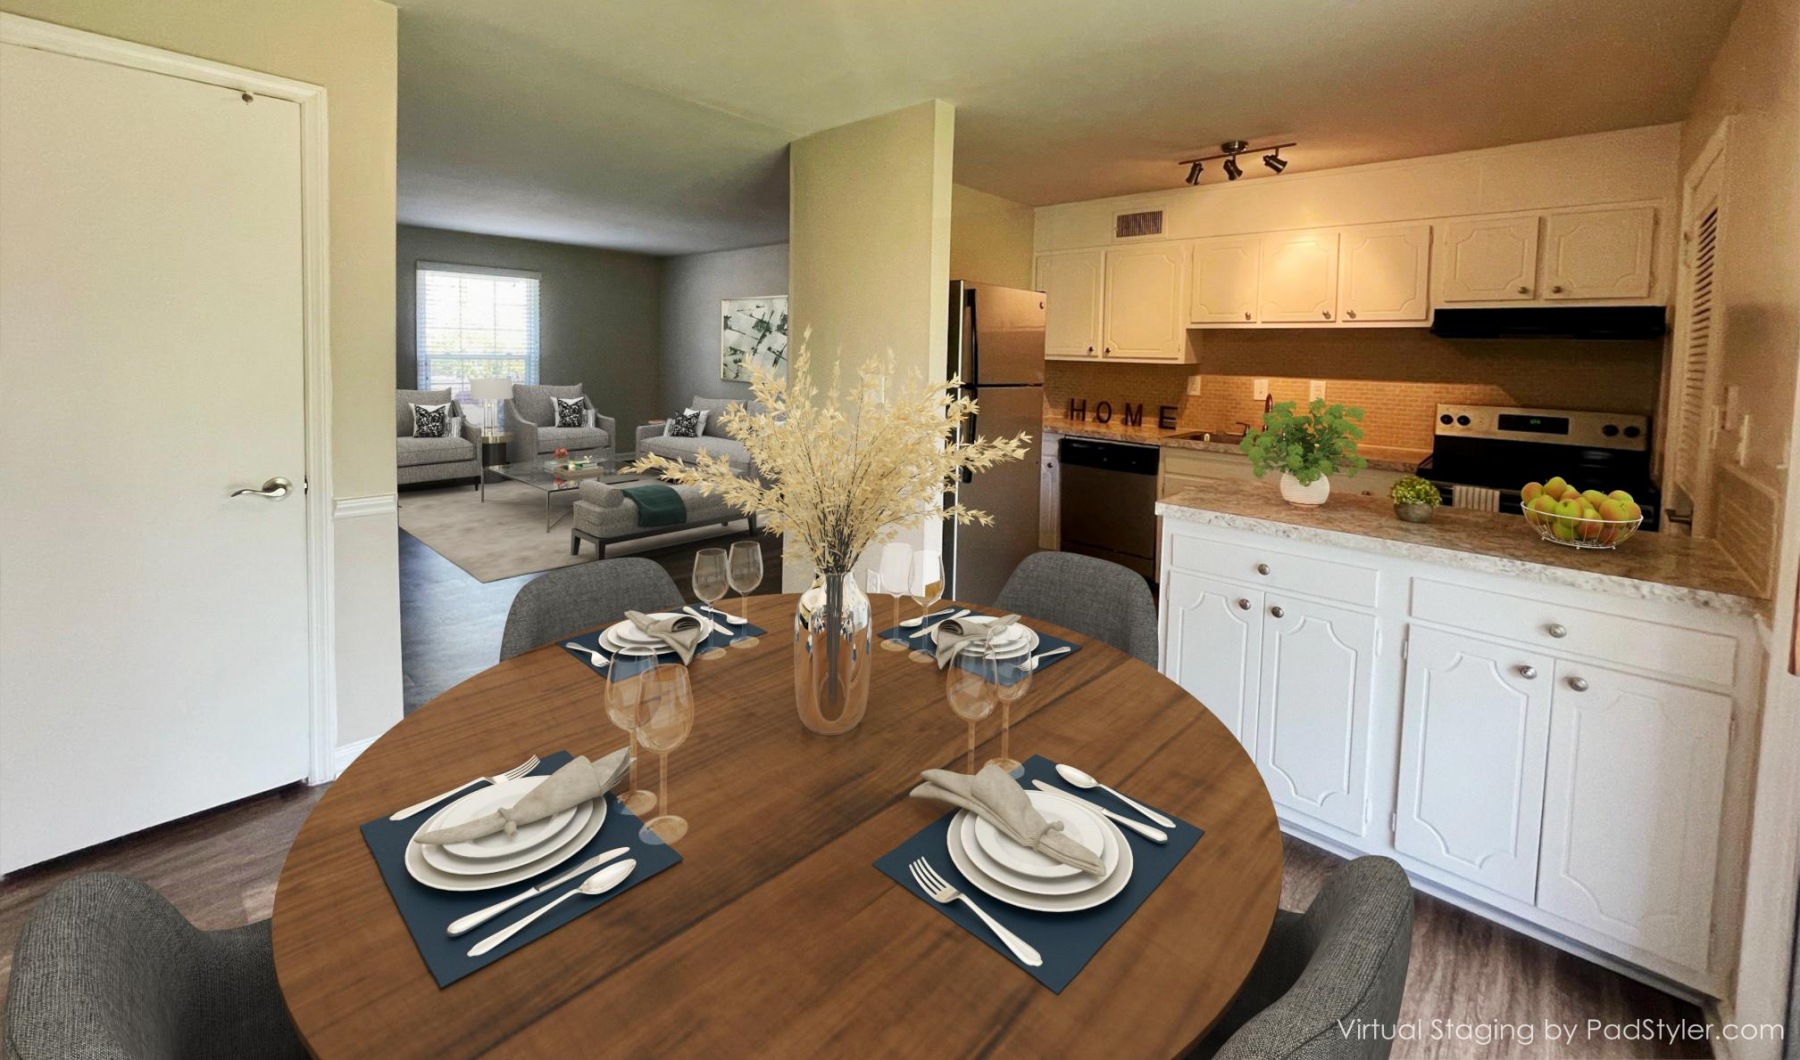 Kitchen at Pinehurst on Providence townhomes in Charlotte, NC